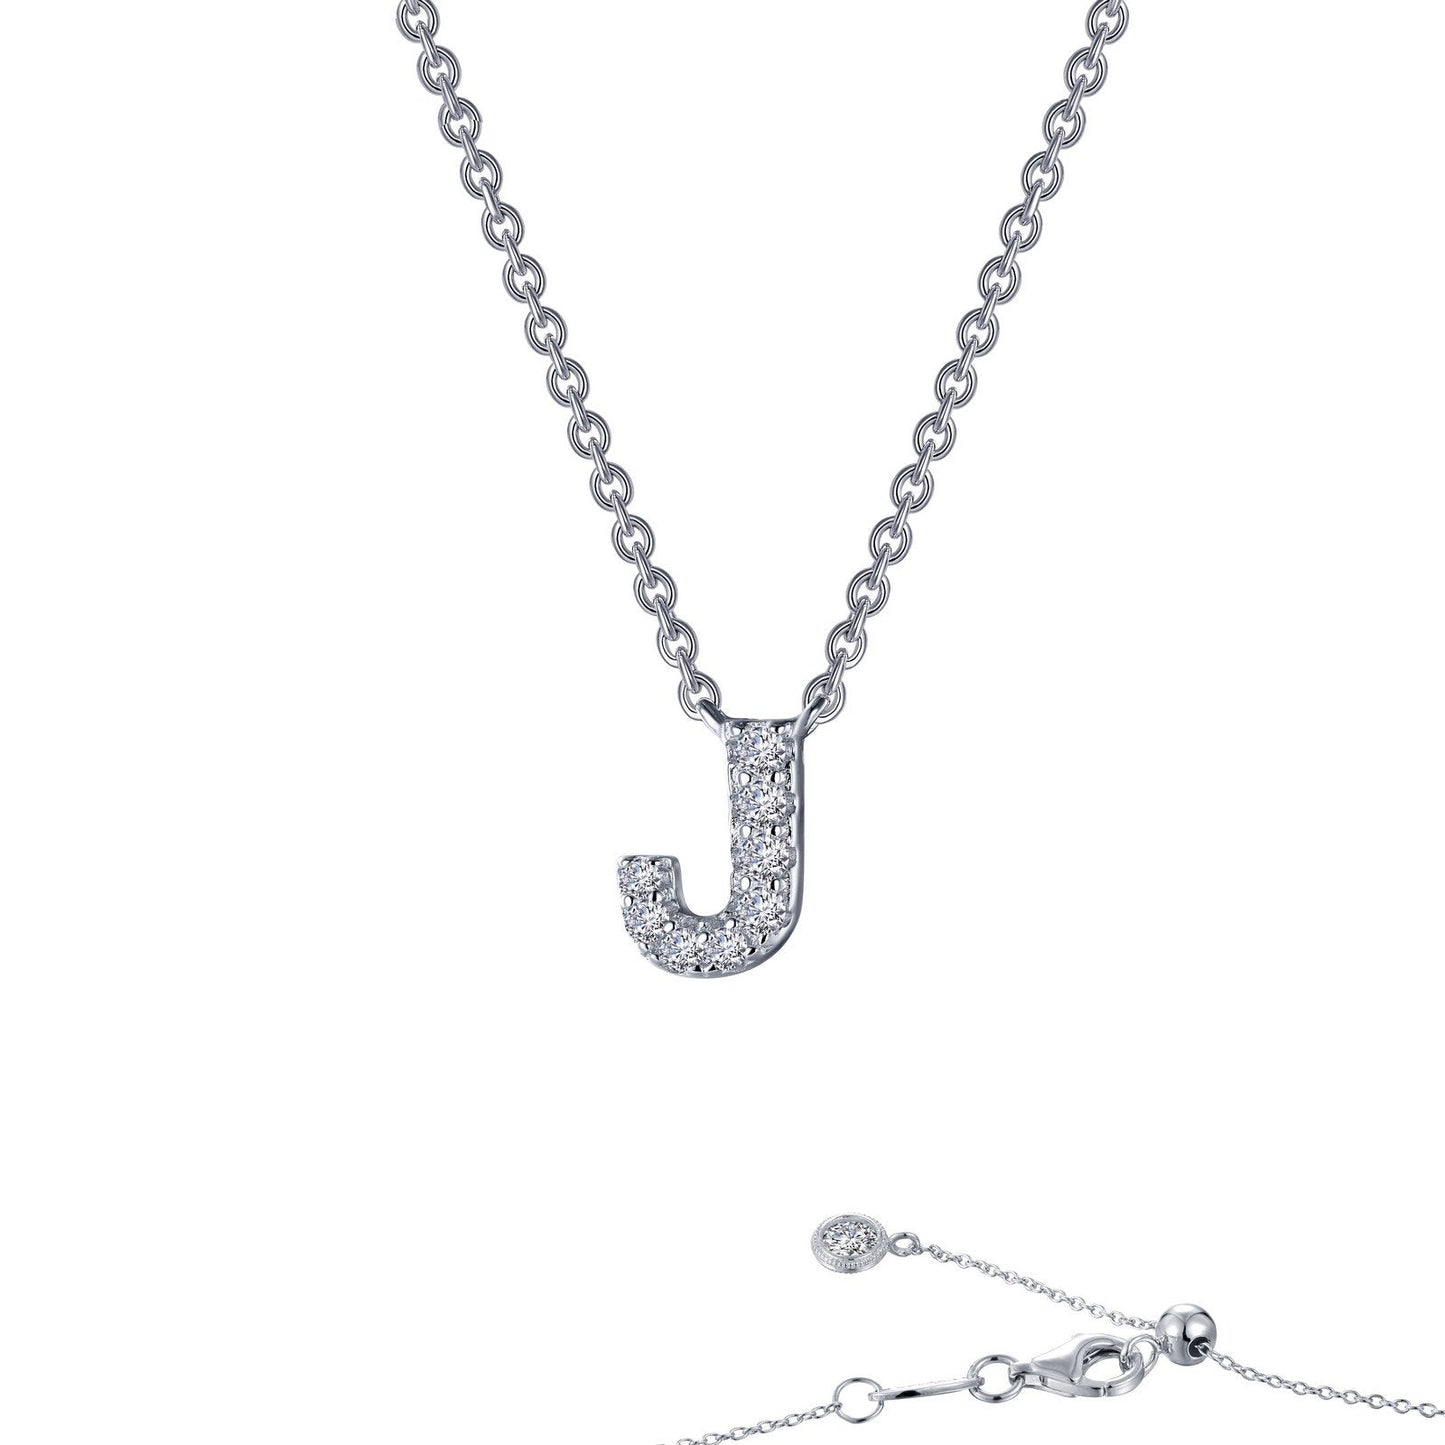 Load image into Gallery viewer, Lafonn Letter J Pendant Necklace Simulated Diamond NECKLACES Platinum 0.34 CTS Approx. 7mm (H) x 5mm (W)
